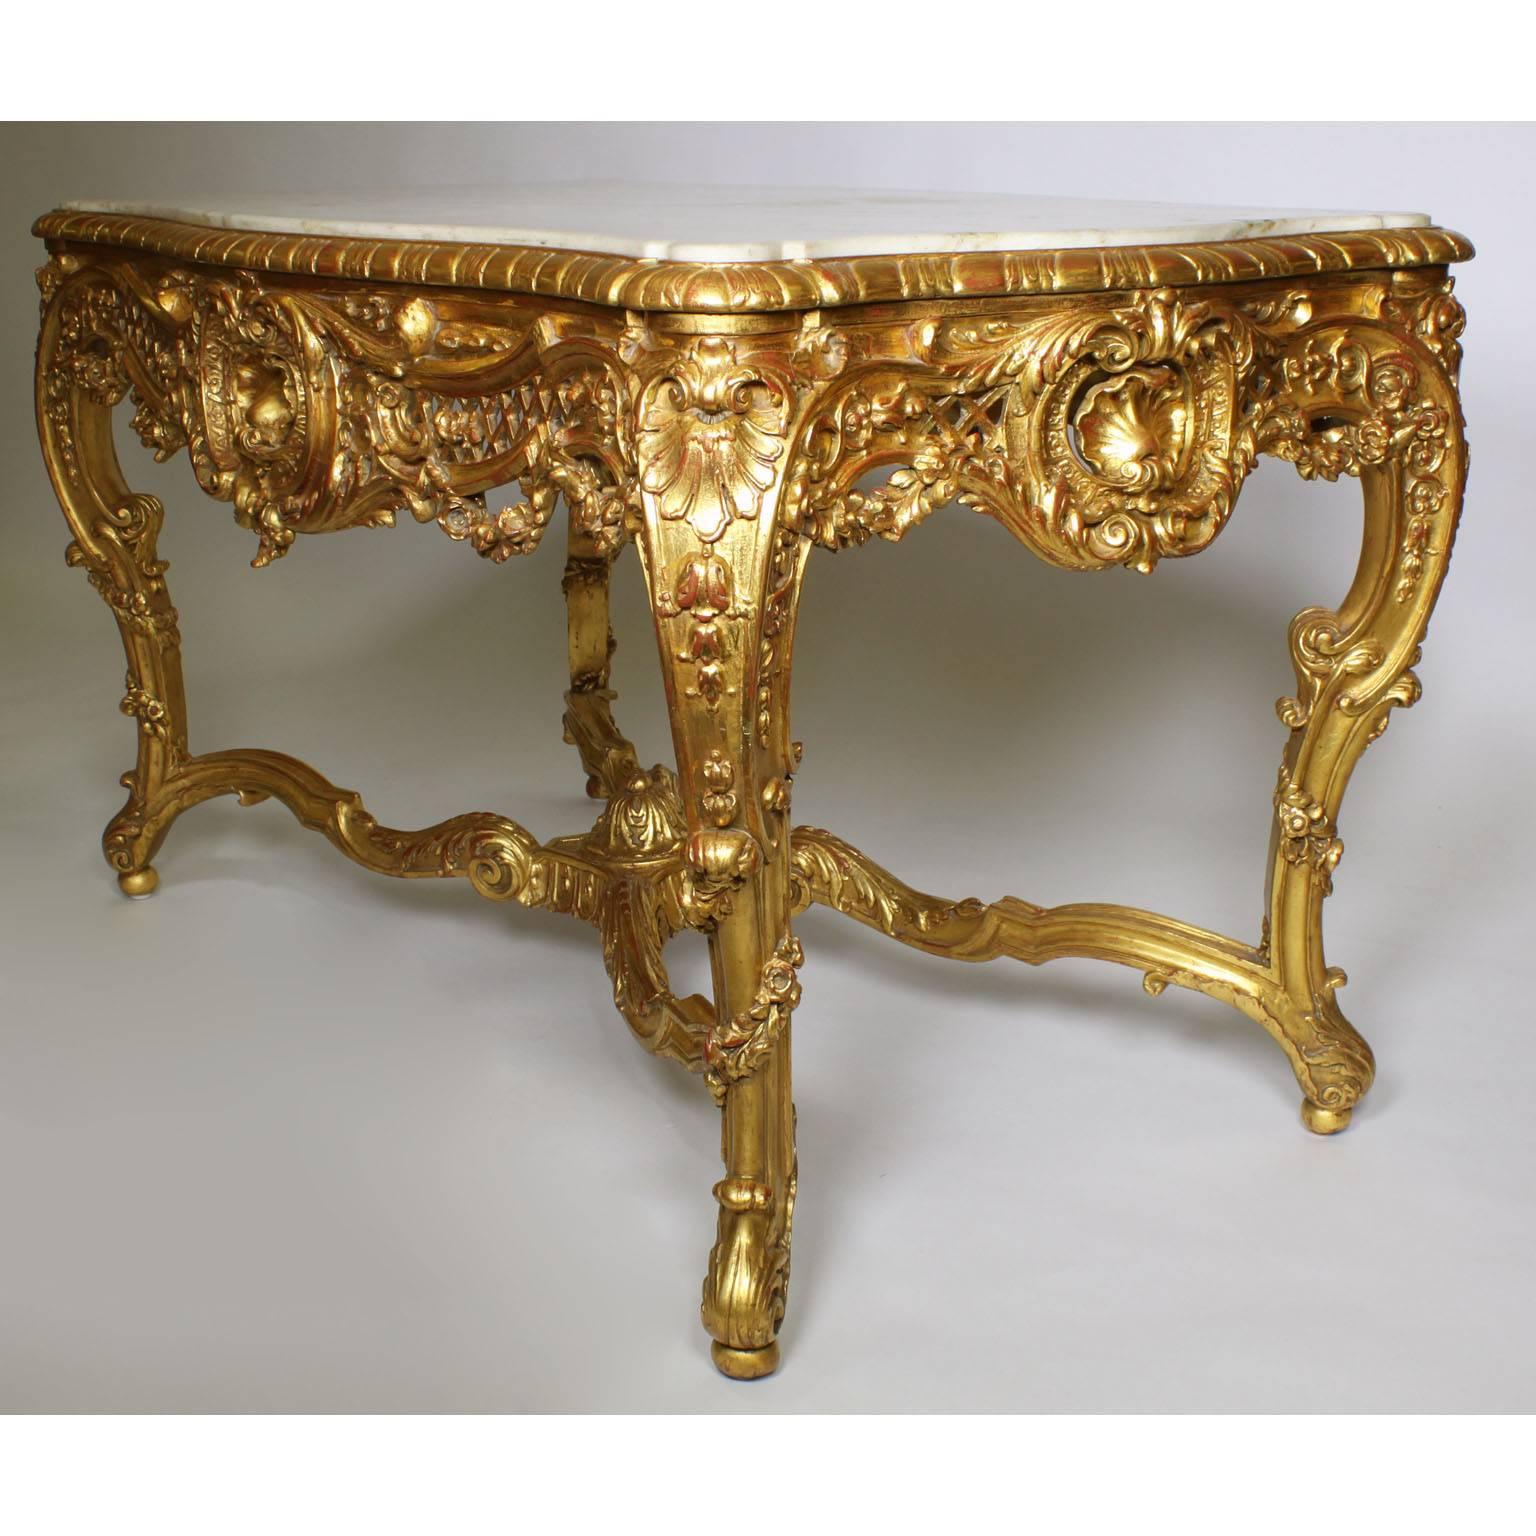 Louis XV French Belle Époque 19th-20th Century Giltwood Carved Rococo Center Hall Table For Sale